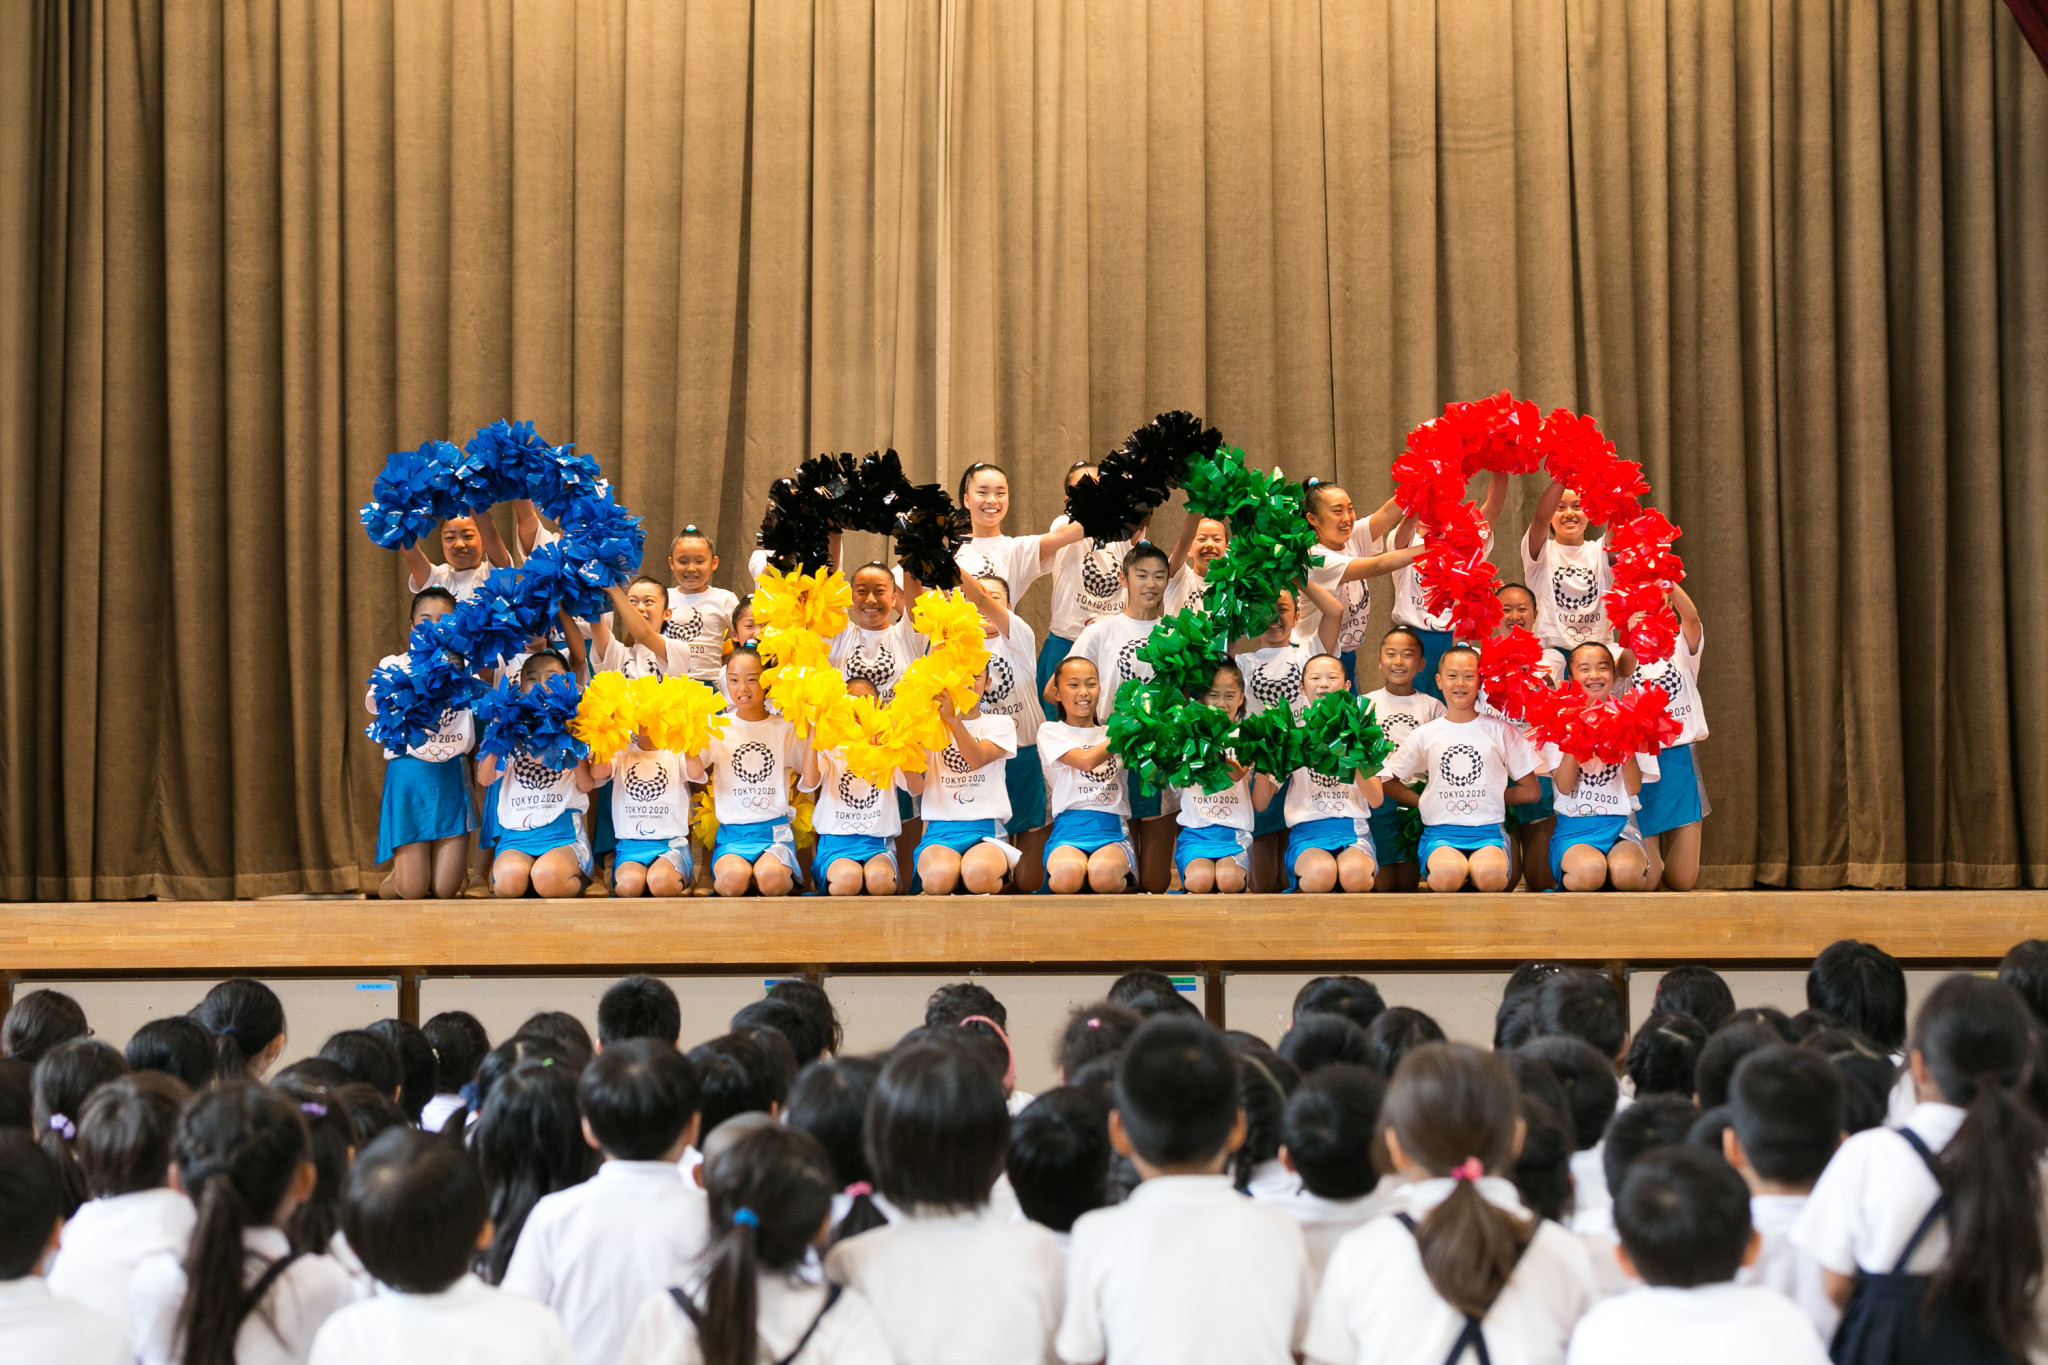 Tokyo 2020 will reveal the three shortlisted mascot designs on Thursday ©Tokyo 2020